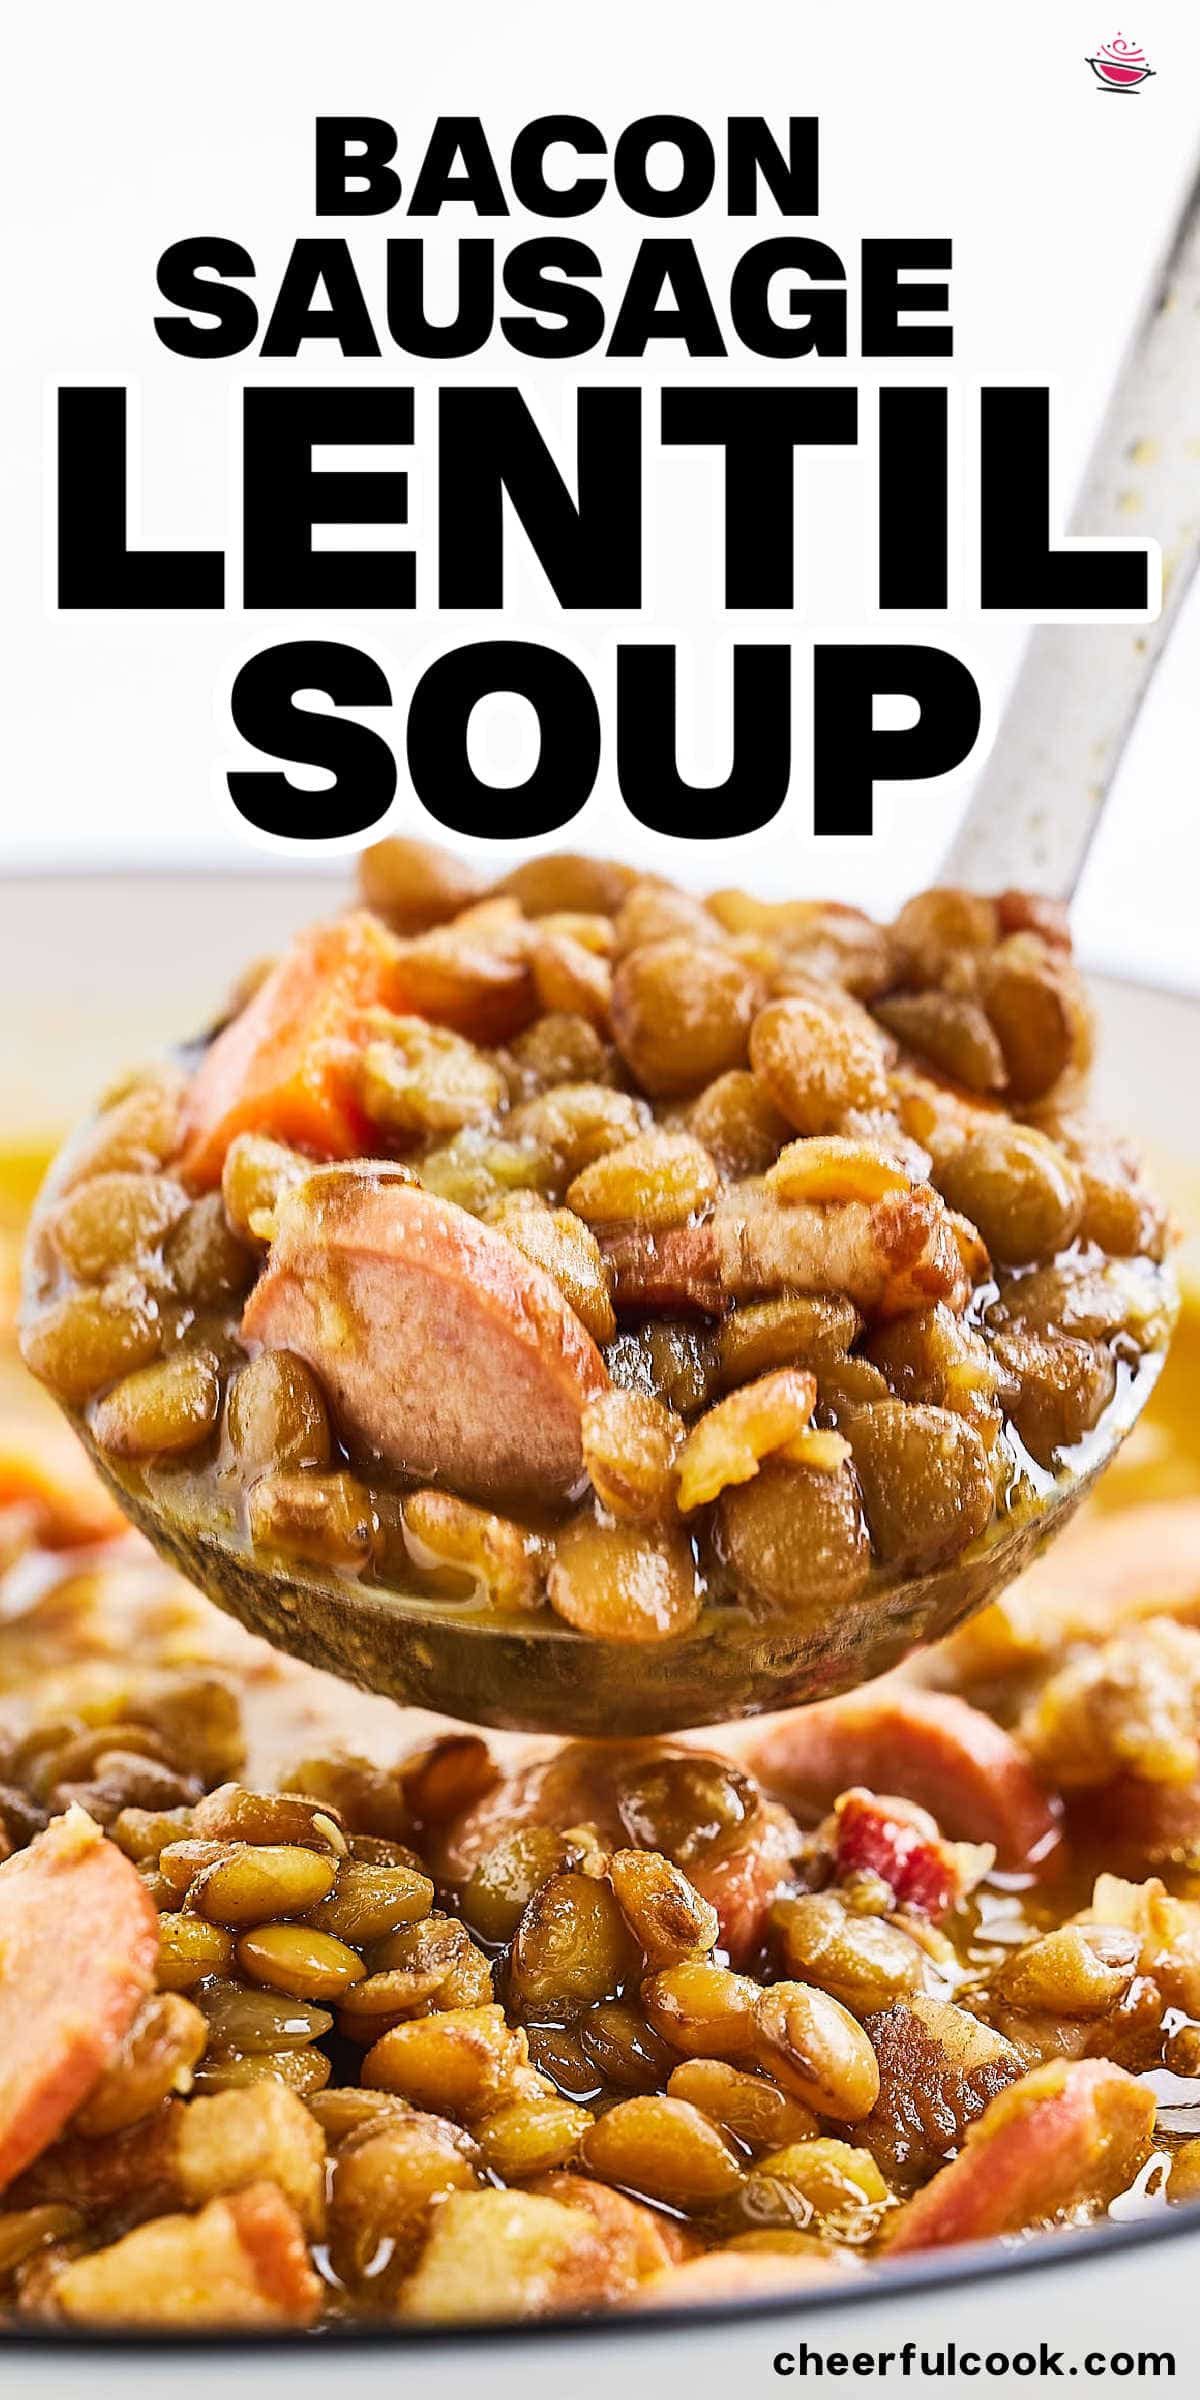 Soup is the perfect comfort food, and this Sausage Lentil Soup recipe is no exception. It's hearty, flavorful, and warming. Best of all, it's easy to make and can be tailored to your liking. #cheerfulcook #lentilsoup #souprecipe #bacon #homemade #recipe #easysouprecipe via @cheerfulcook